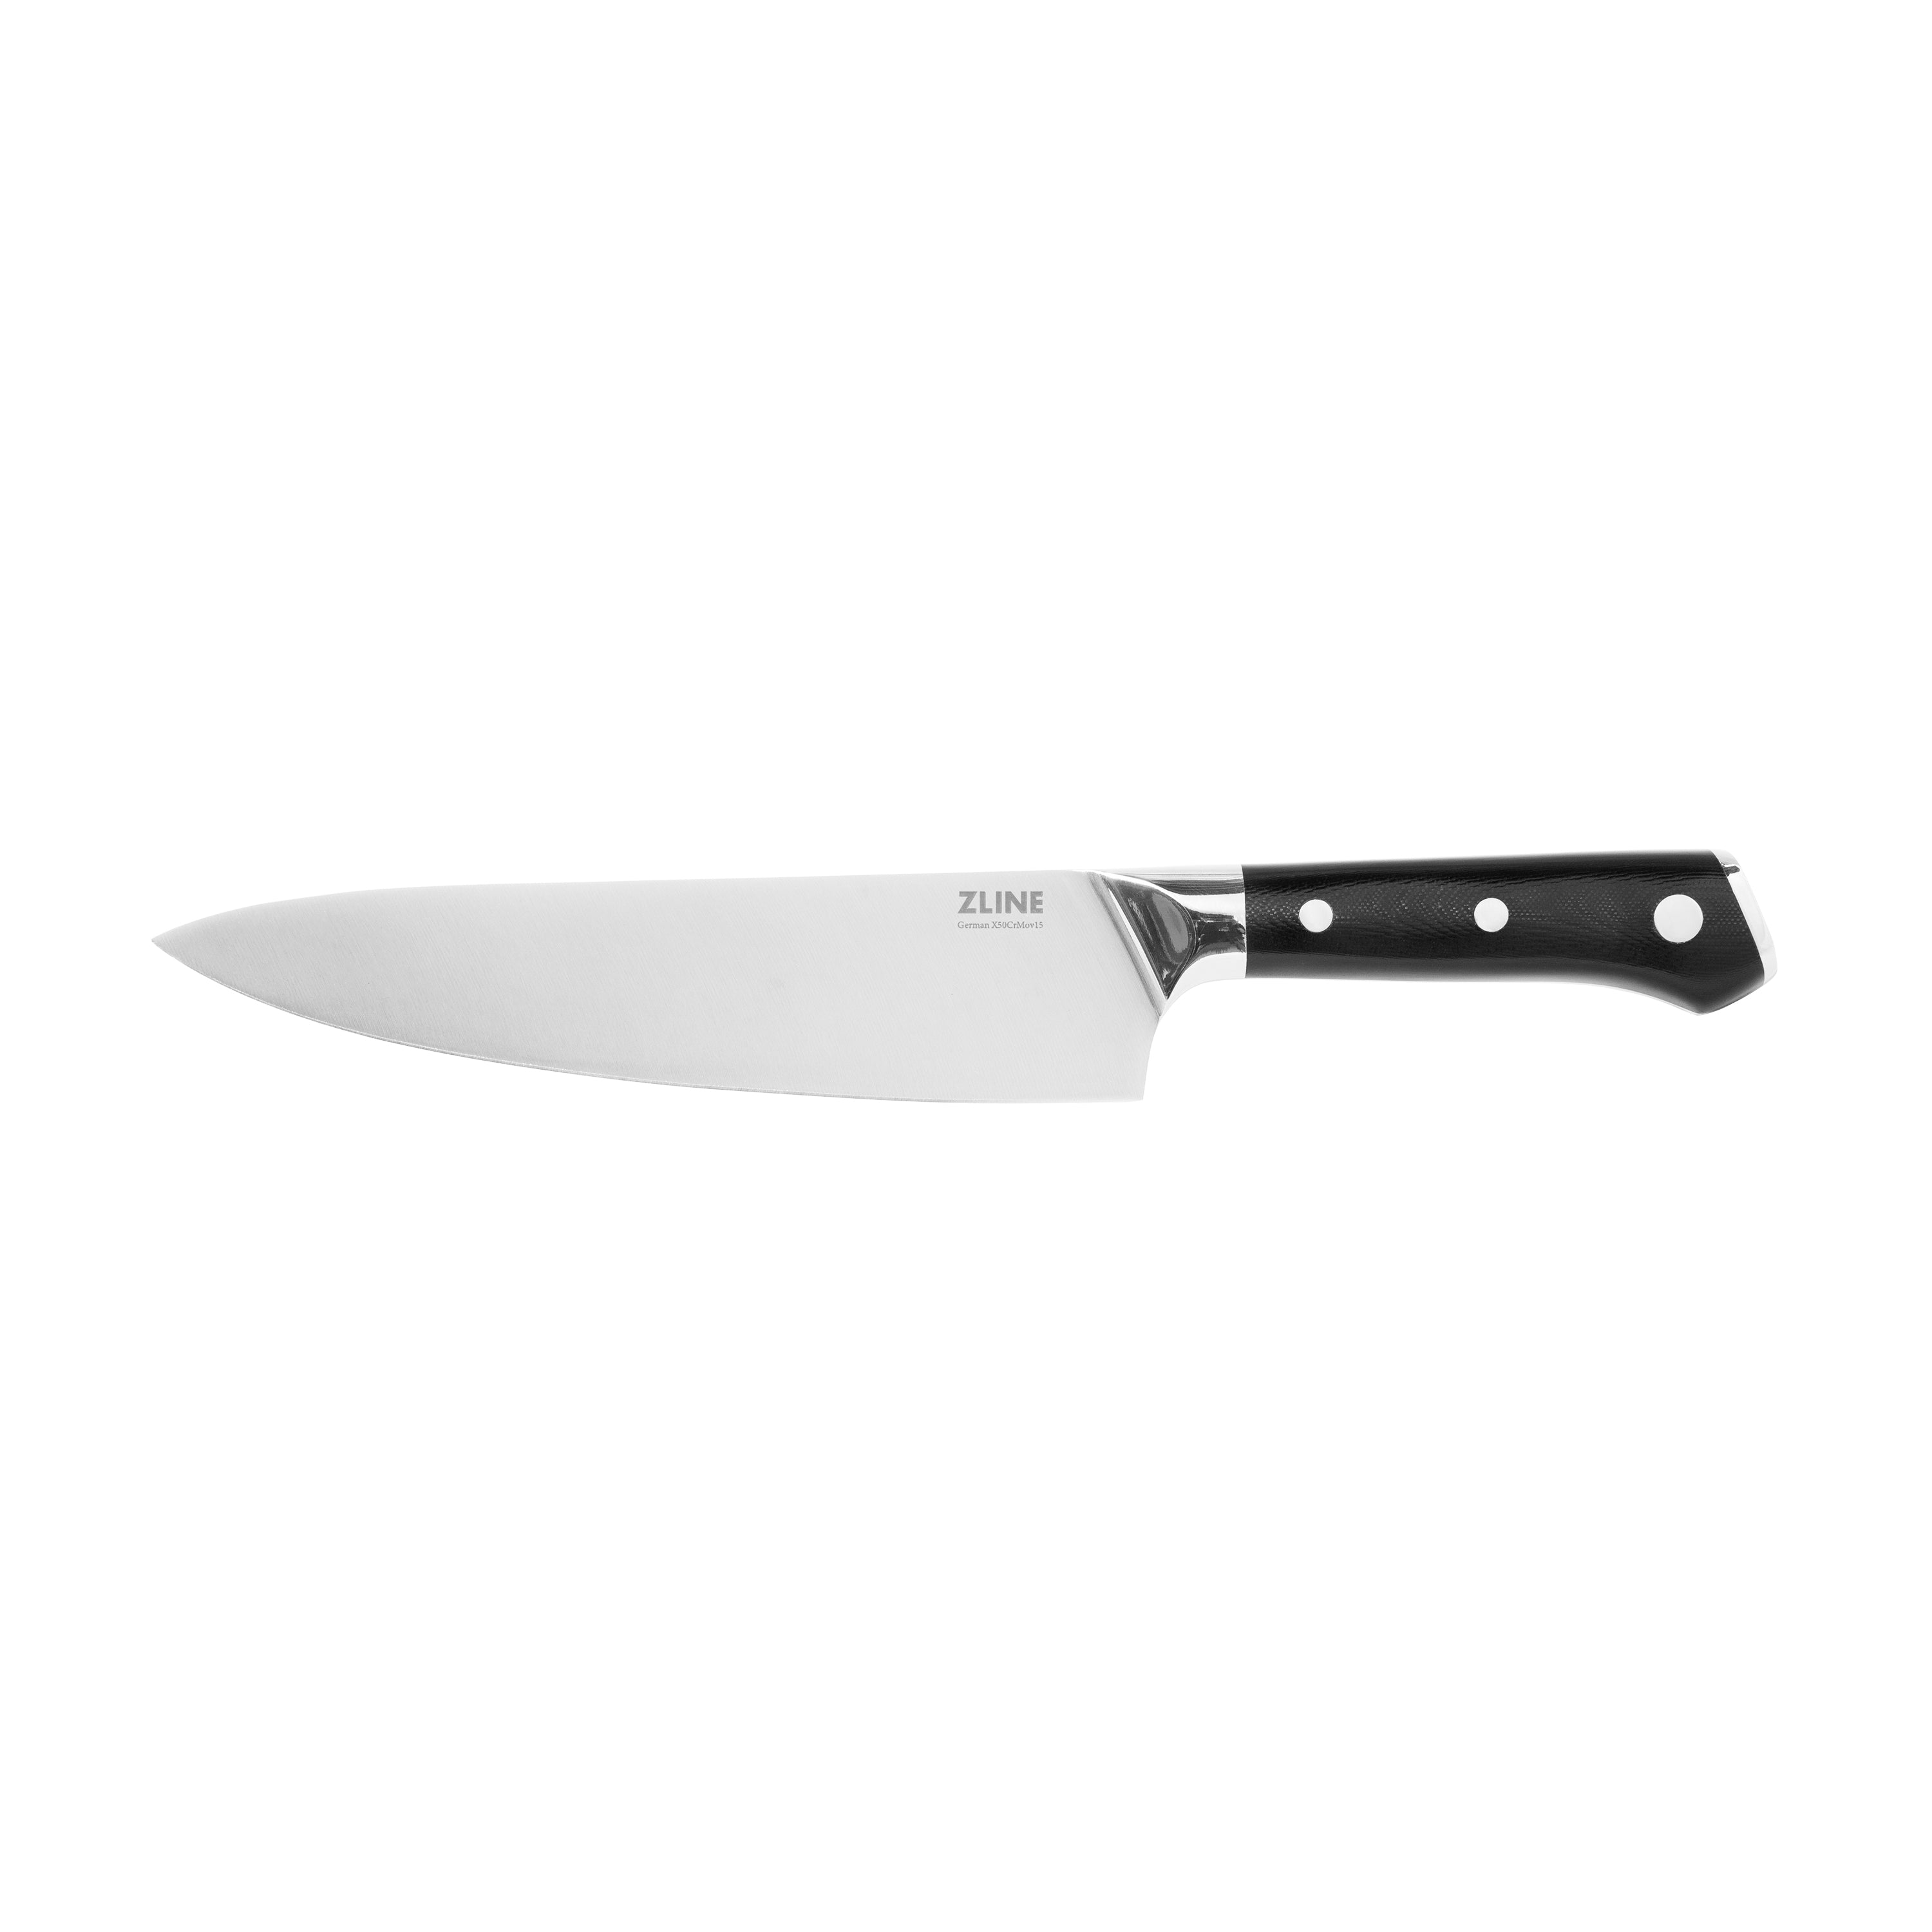 8'' GERMAN STAINLESS STEEL CHEF KNIFE – KANKA Grill